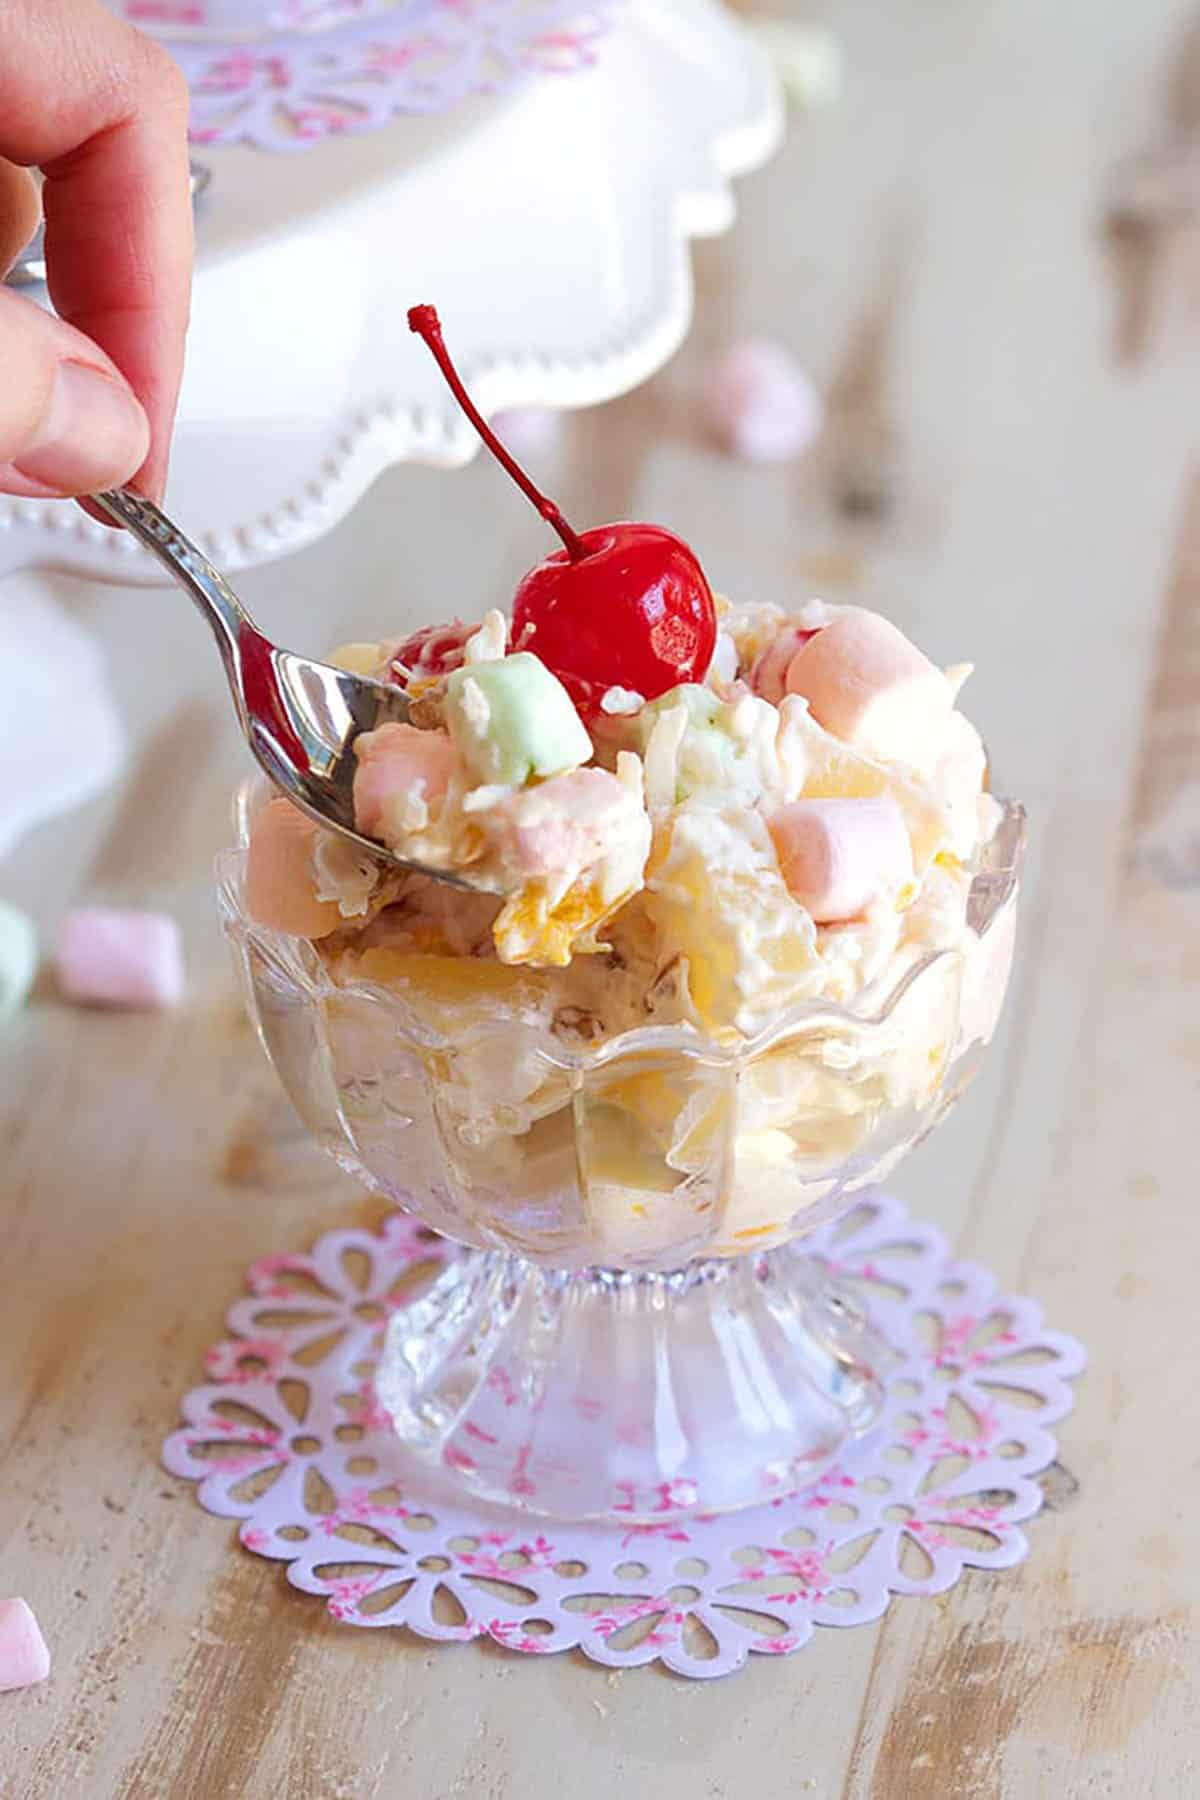 Glass dessert bowl with ambrosia salad topped with a cherry and a hand dipping a spoon into the salad.